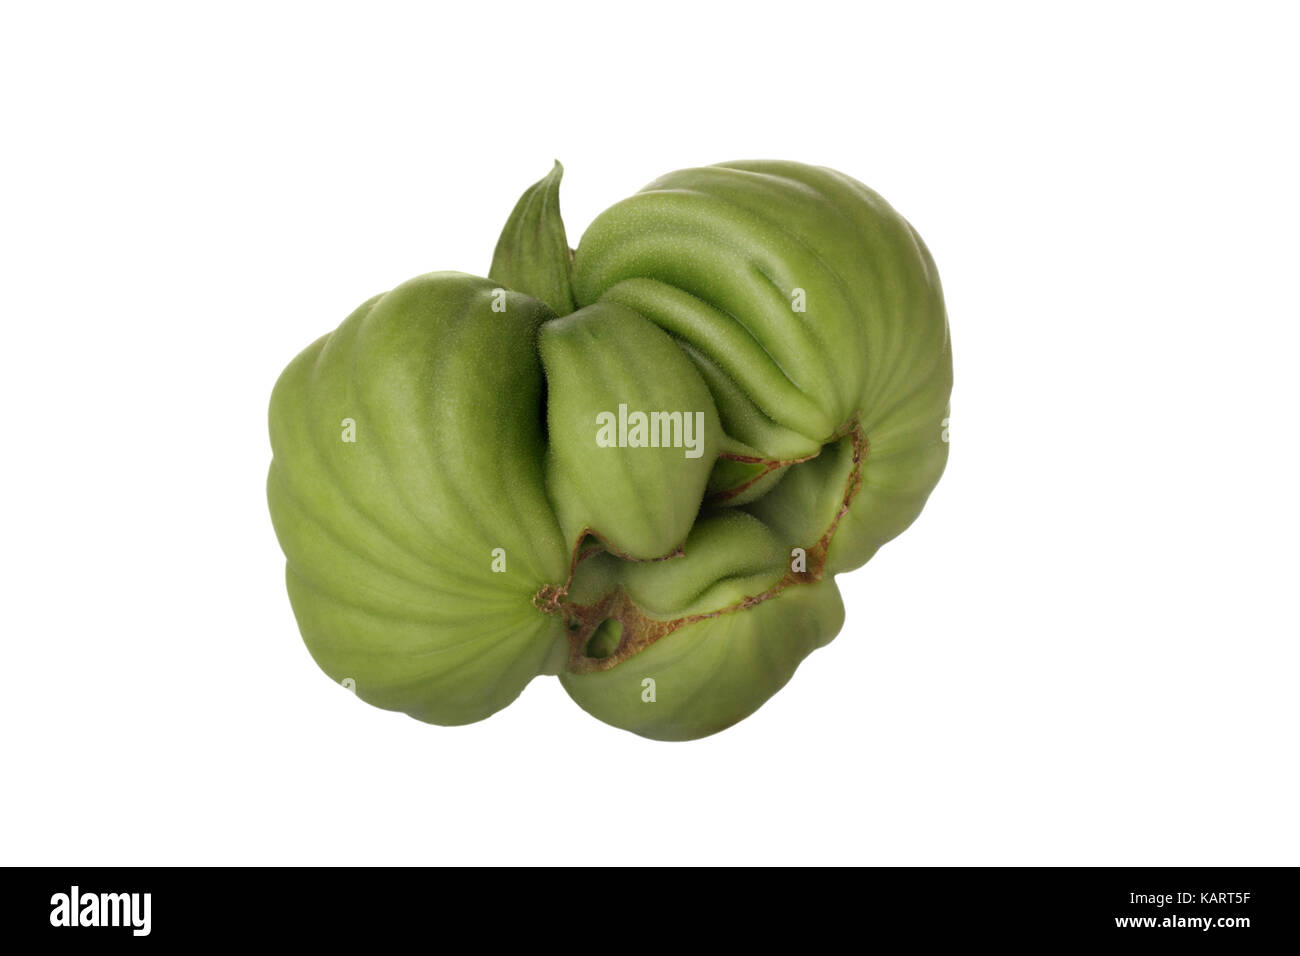 Unripe and misshapened beefmaster tomato with facial features resembling grumpy worn wrinkly face. Stock Photo